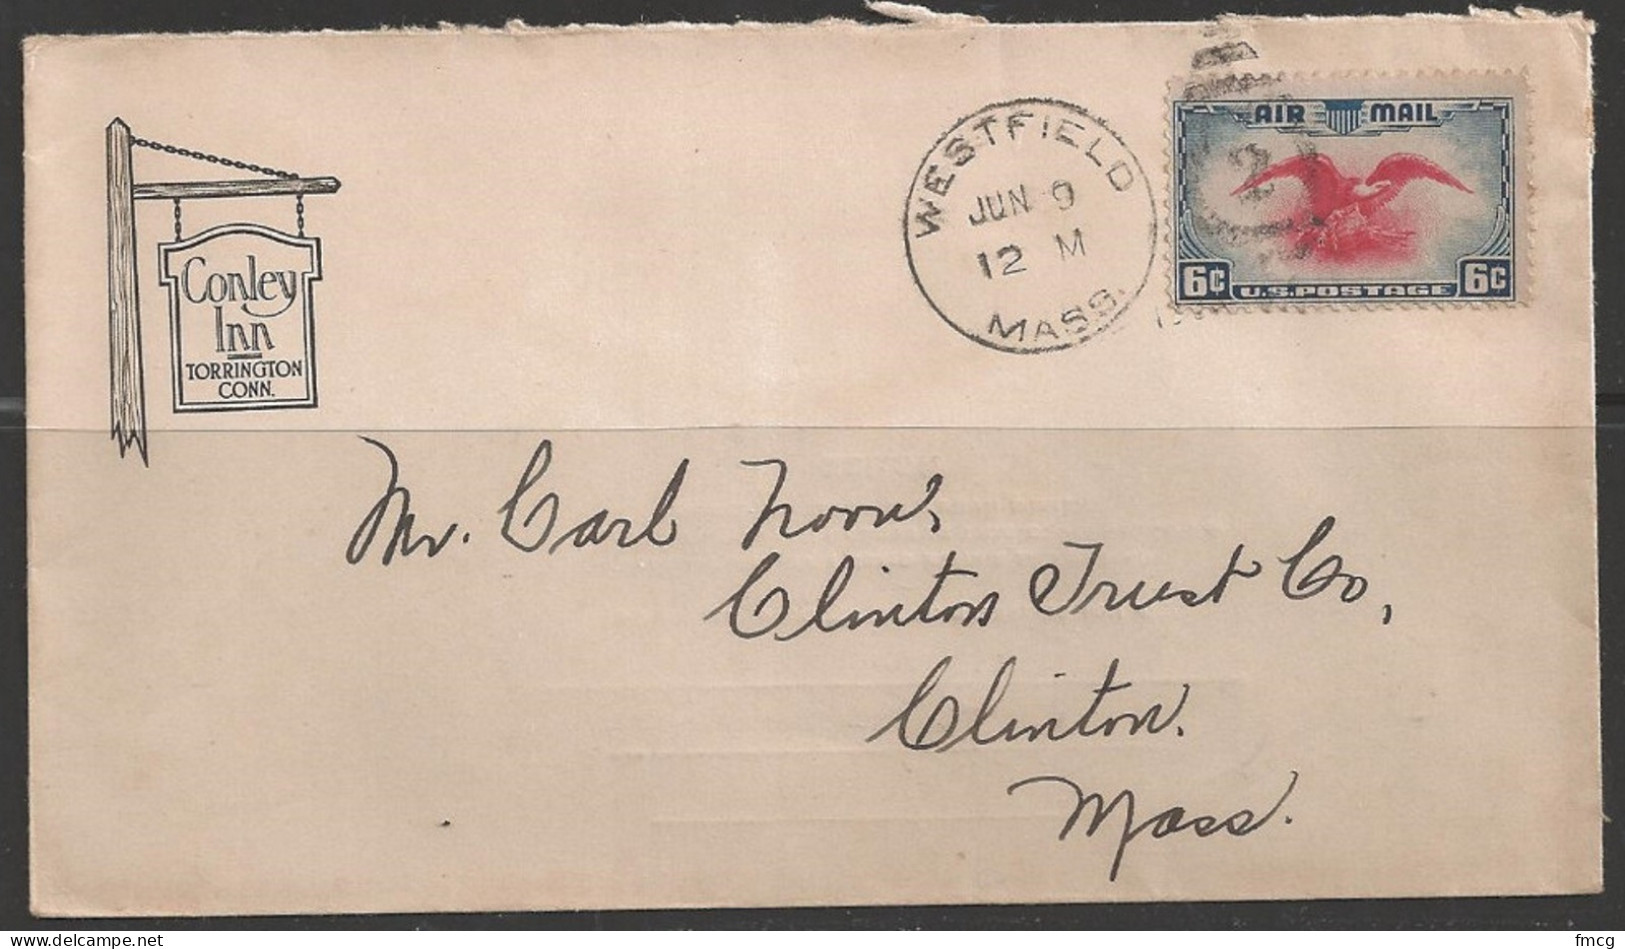 Westfield Mass (Jun 9) 6 Cents Airmail, Colony Inn Corner Card - Covers & Documents